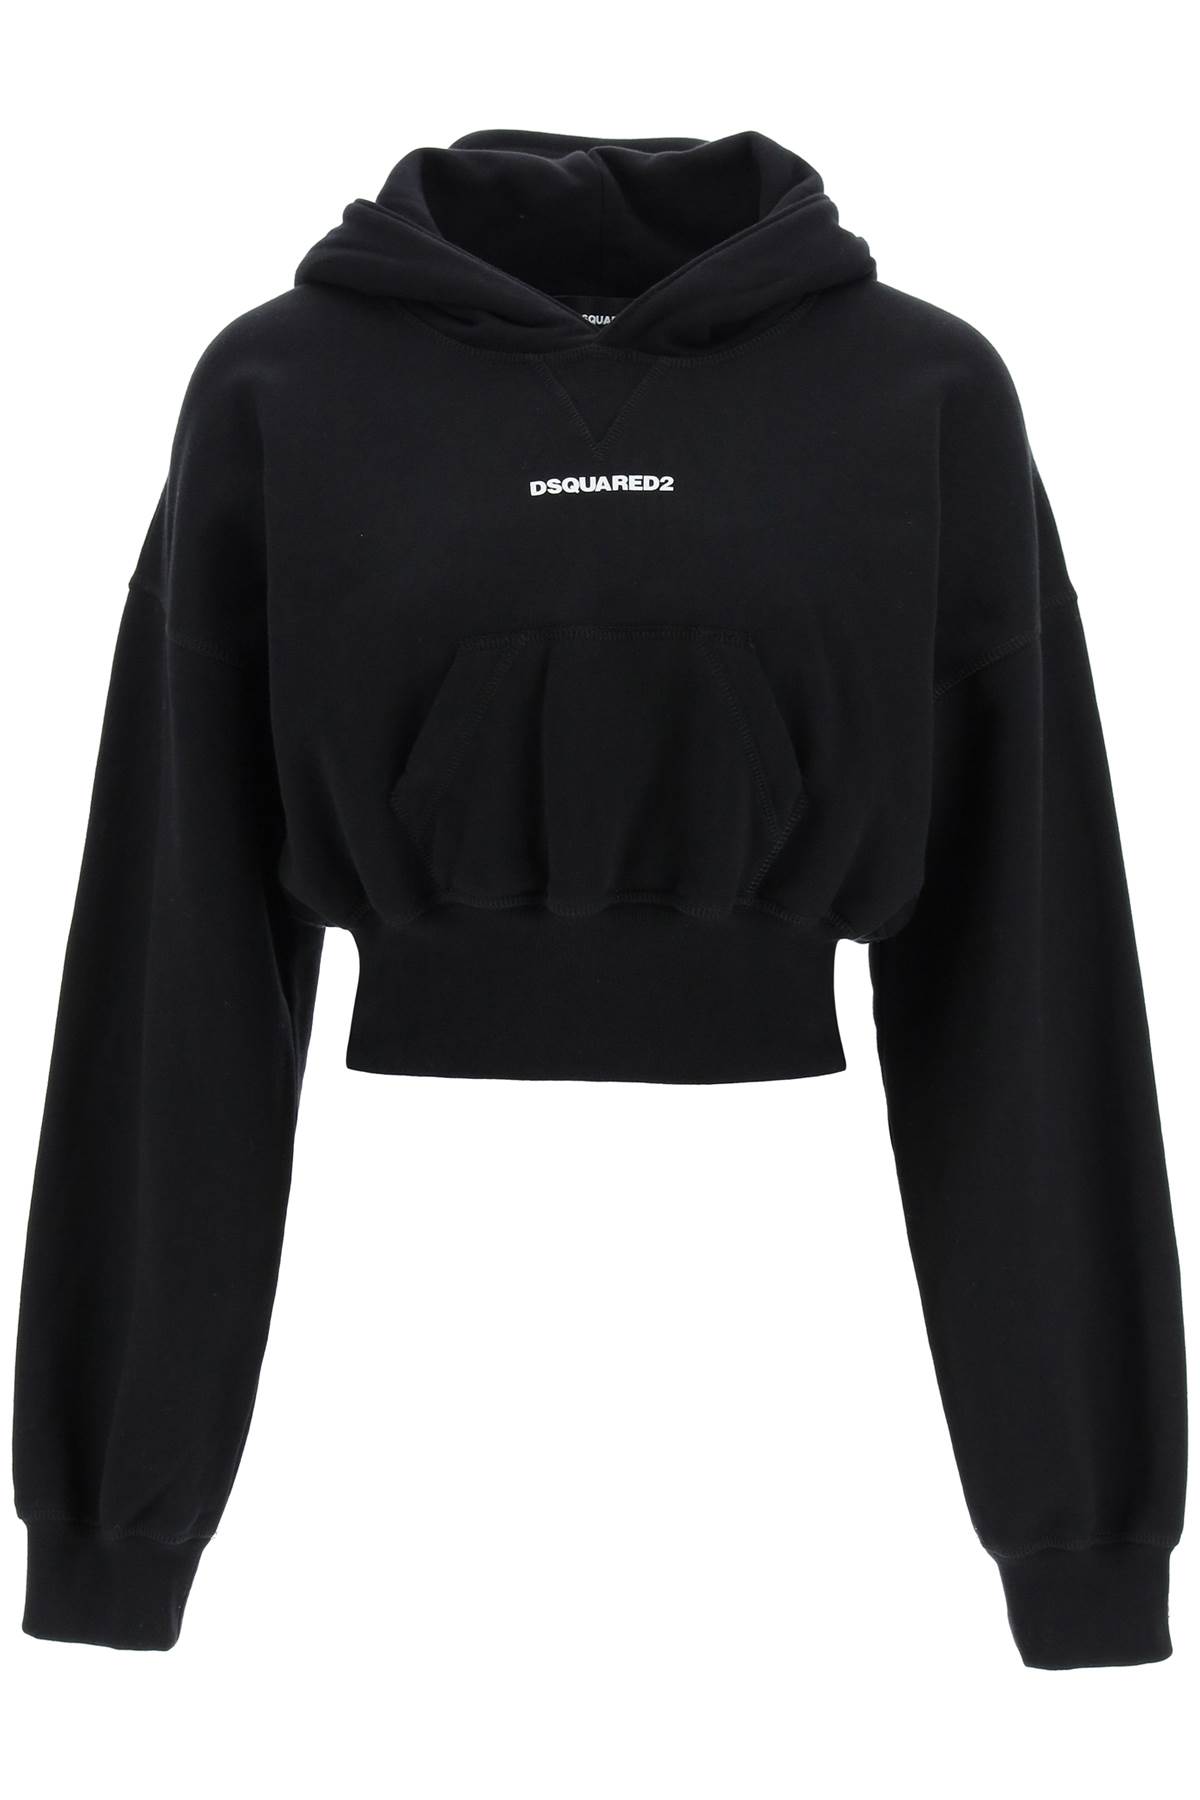 DSQUARED2 CROPPED HOODIE WITH BASEBALL CAP